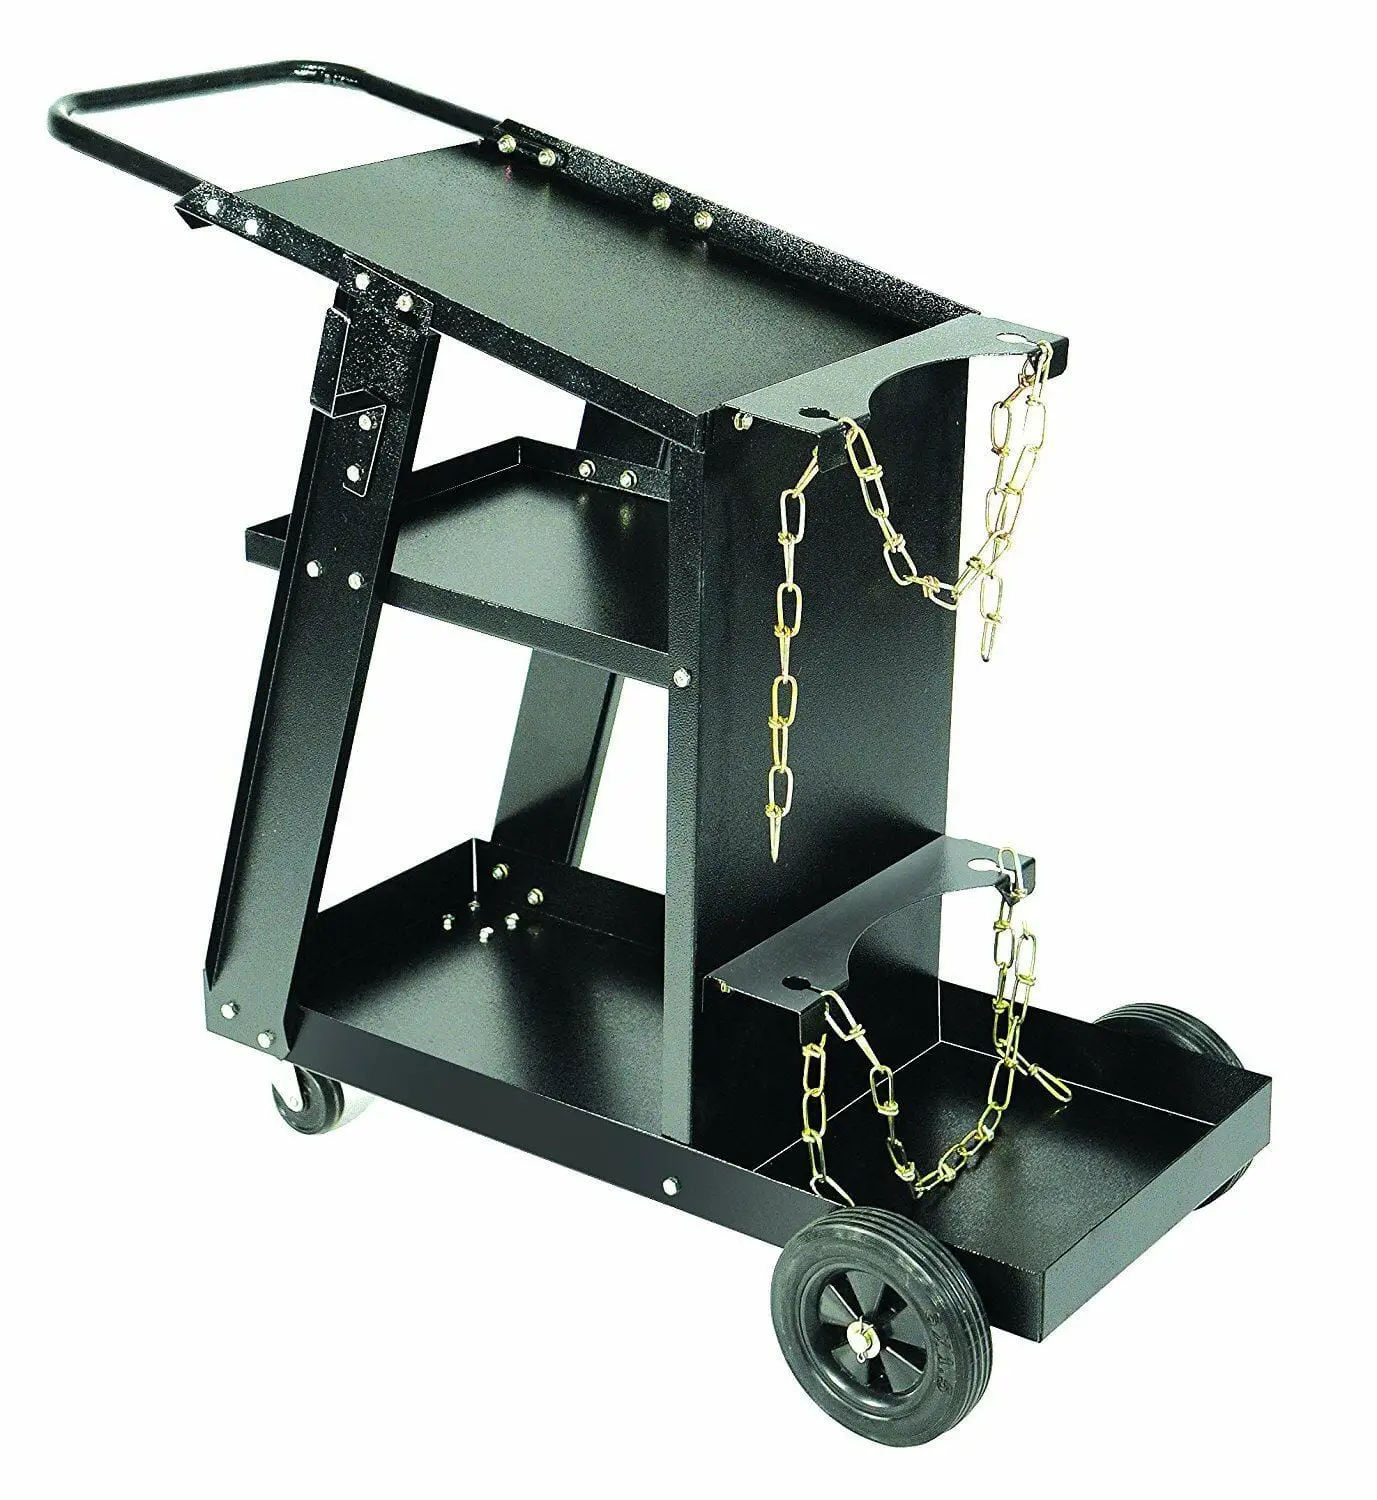 wc300 welding cart from hotmax